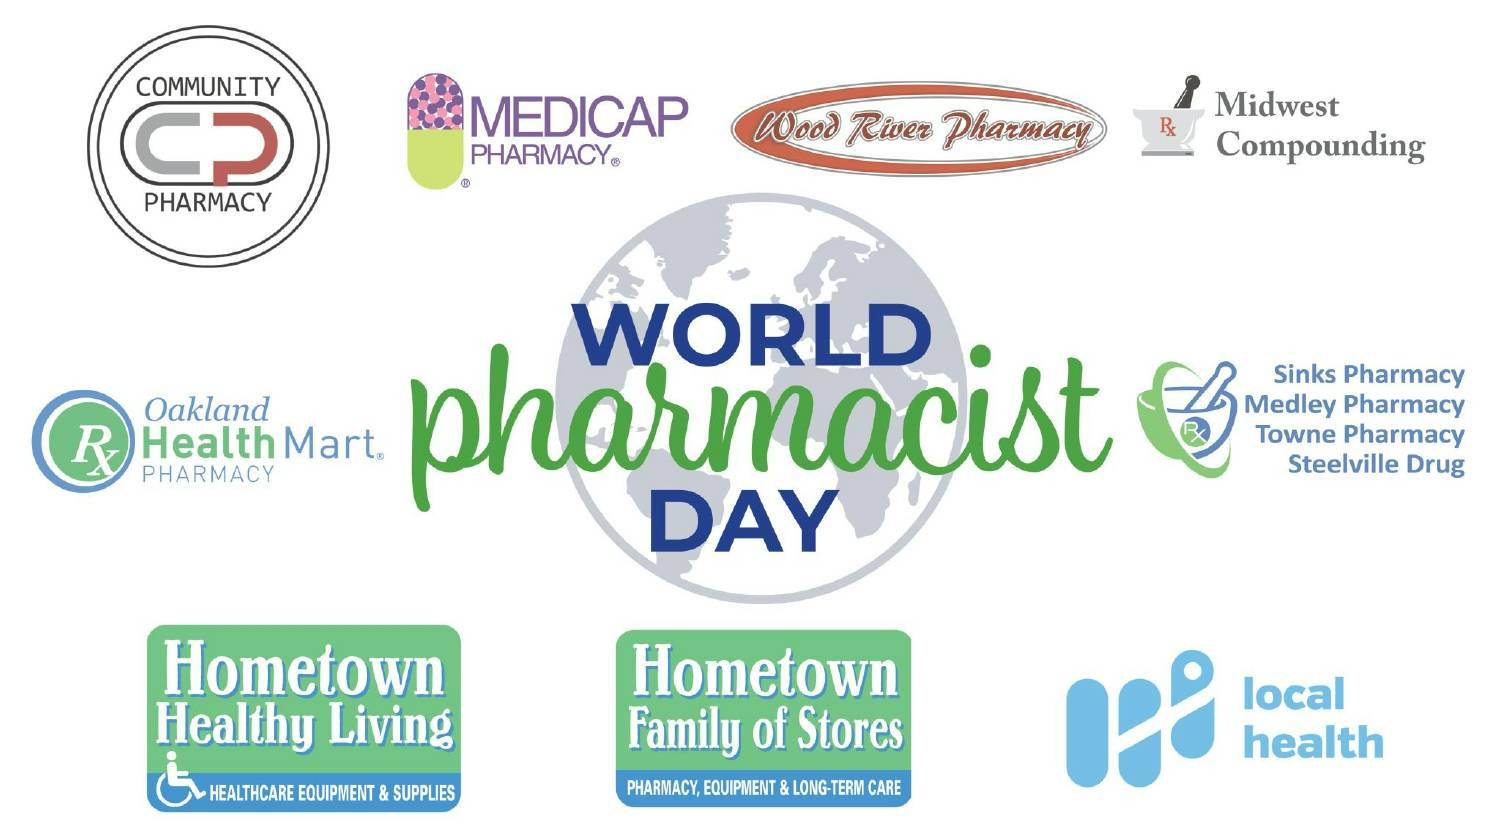 We proudly recognize all of our pharmacist across all of our subsidiaries on world pharmacist day!